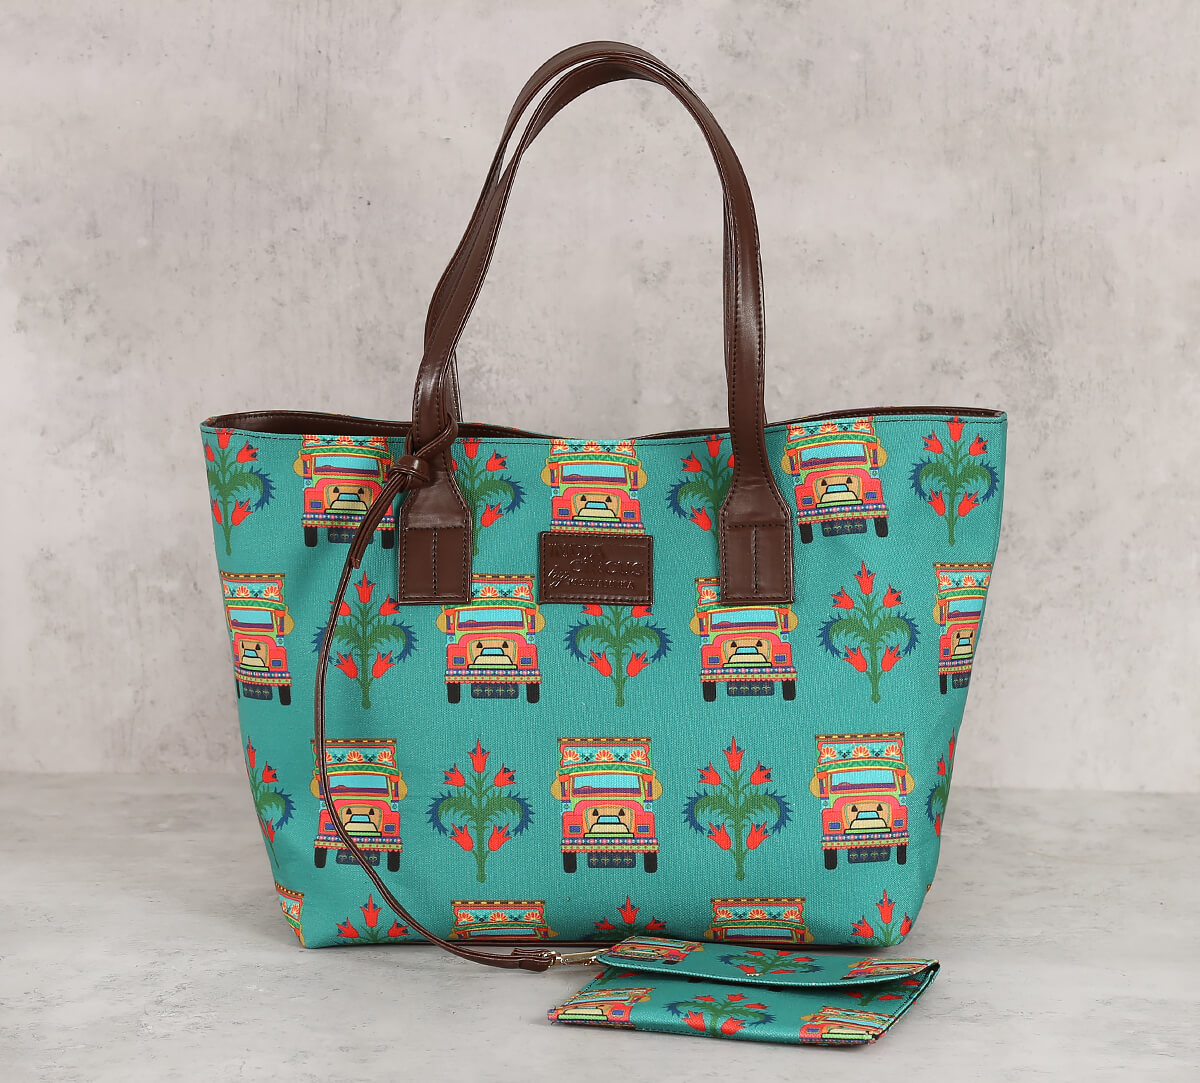 Details more than 81 big tote bags online india latest - in.cdgdbentre